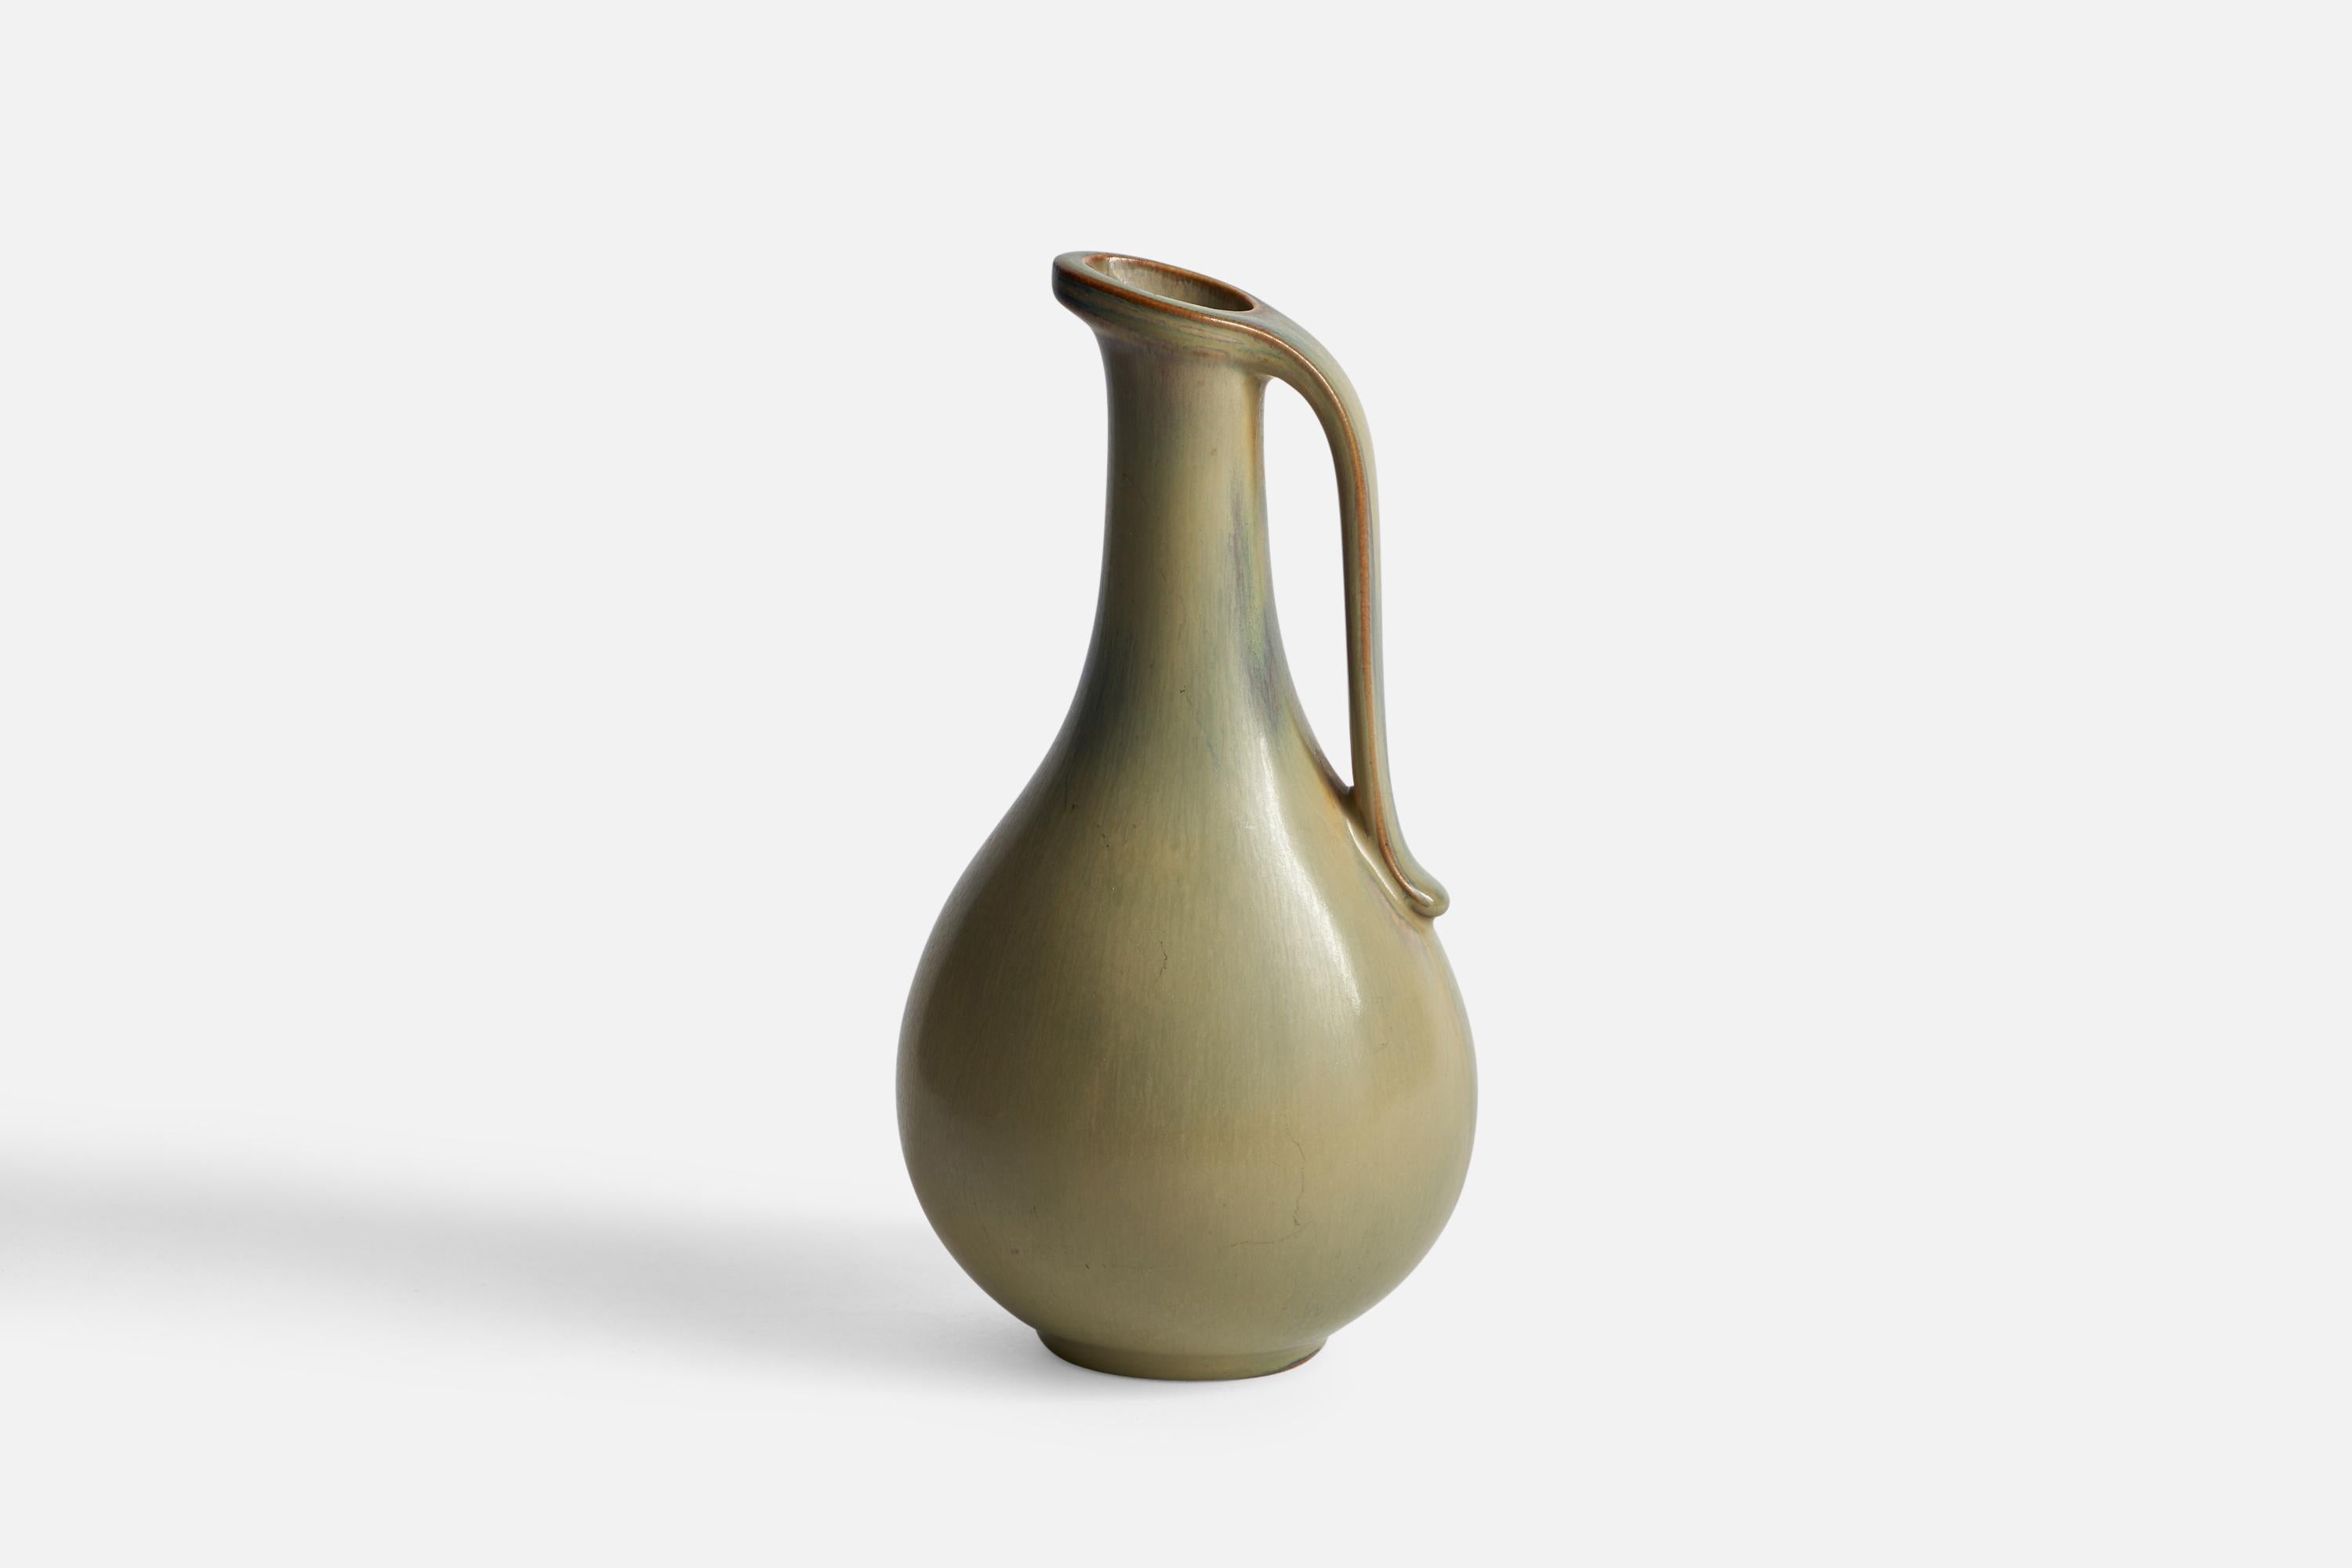 A green-glazed stoneware pitcher designed by Gunnar Nylund and produced by Rörstrand, Sweden, 1940s.